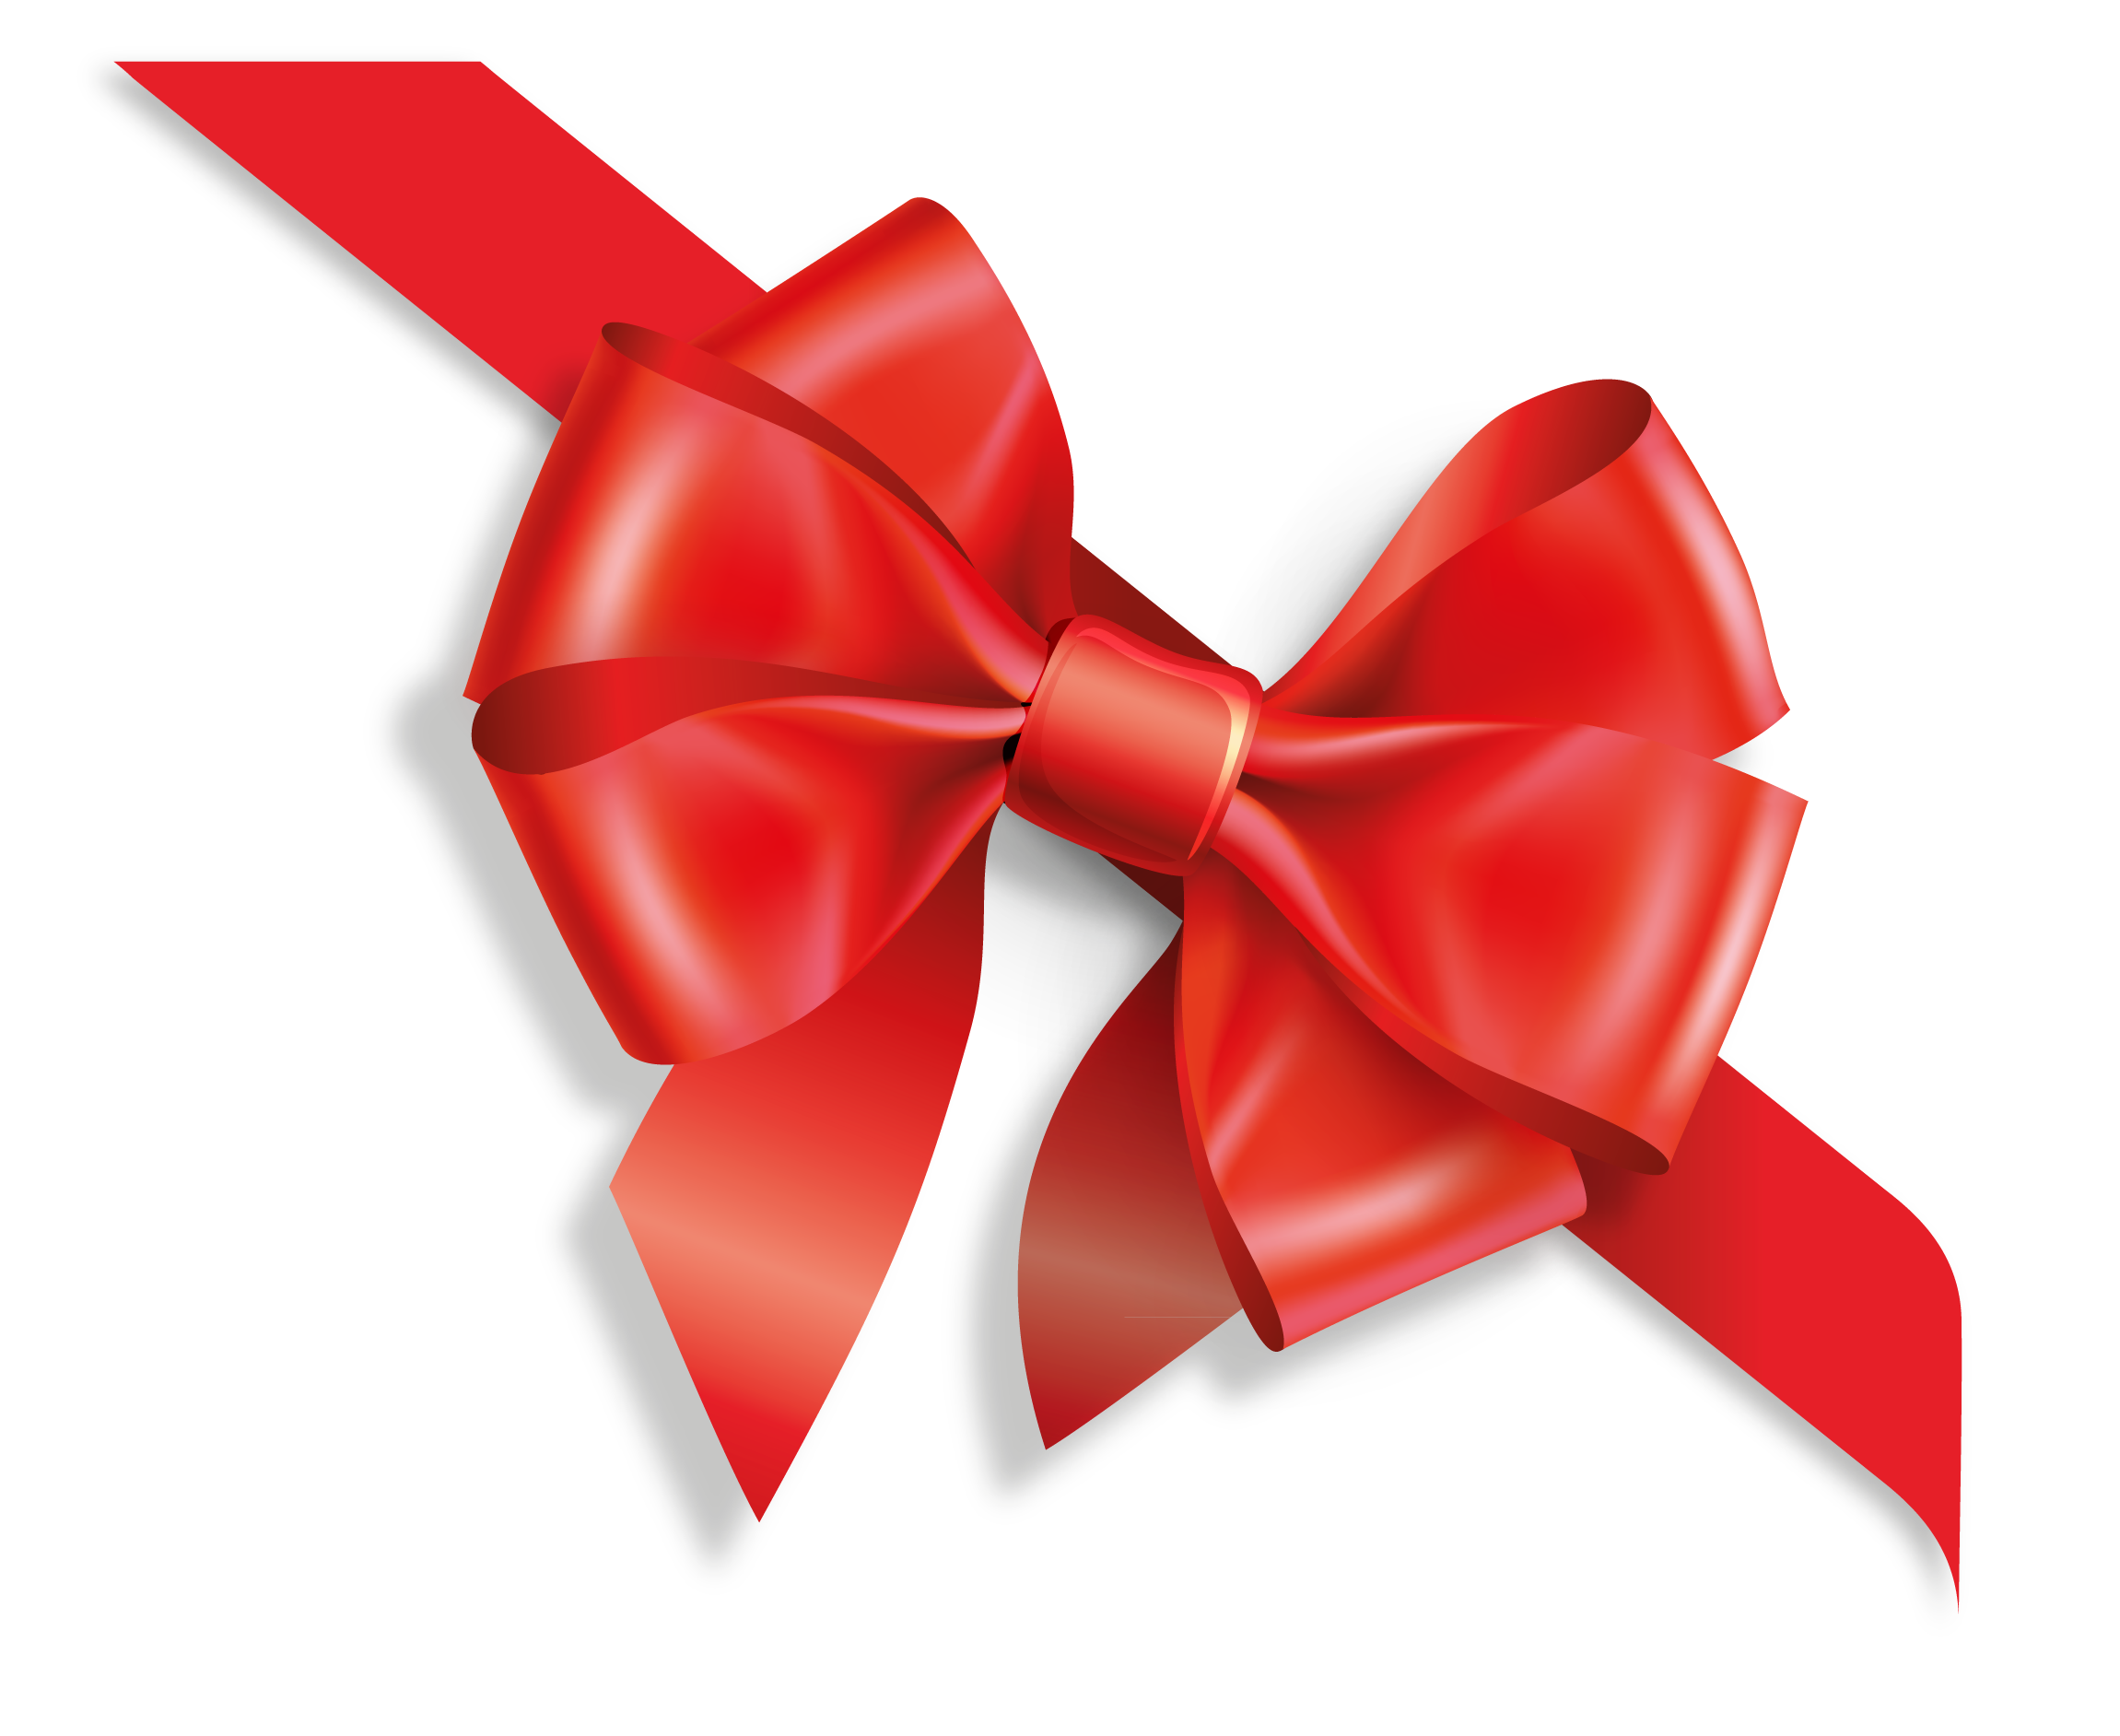 Bow PNG Clipart